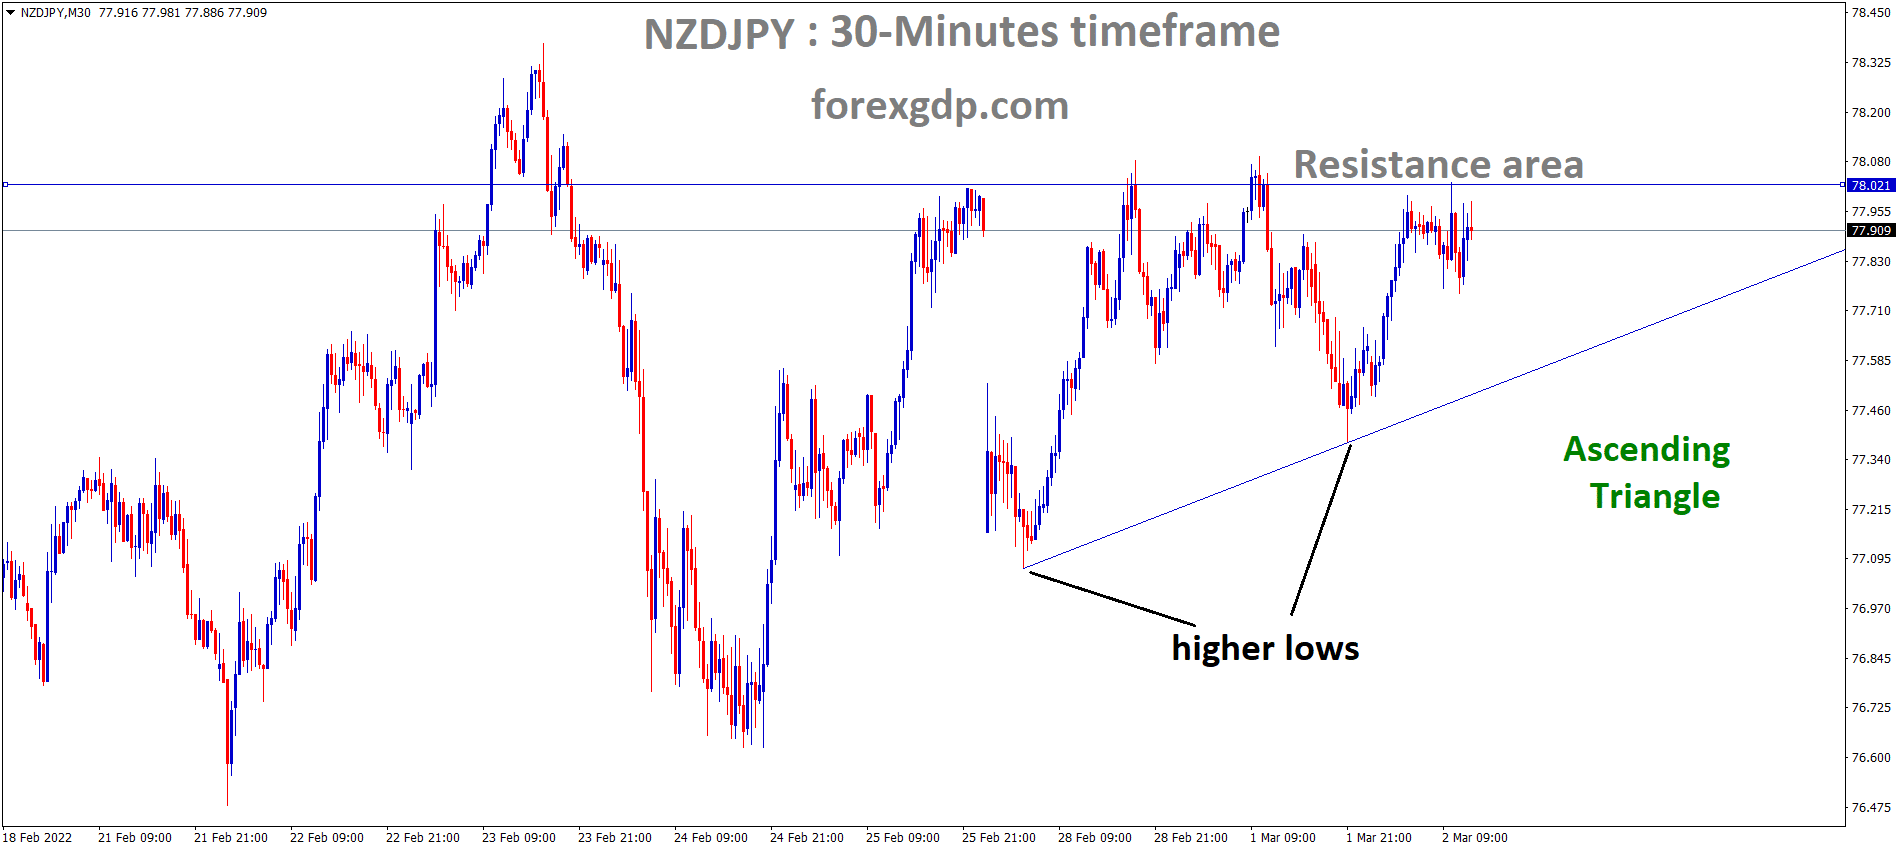 NZDJPY is moving in an ascending triangle pattern and the market has reached the Resistance area of the Ascending triangle pattern 1